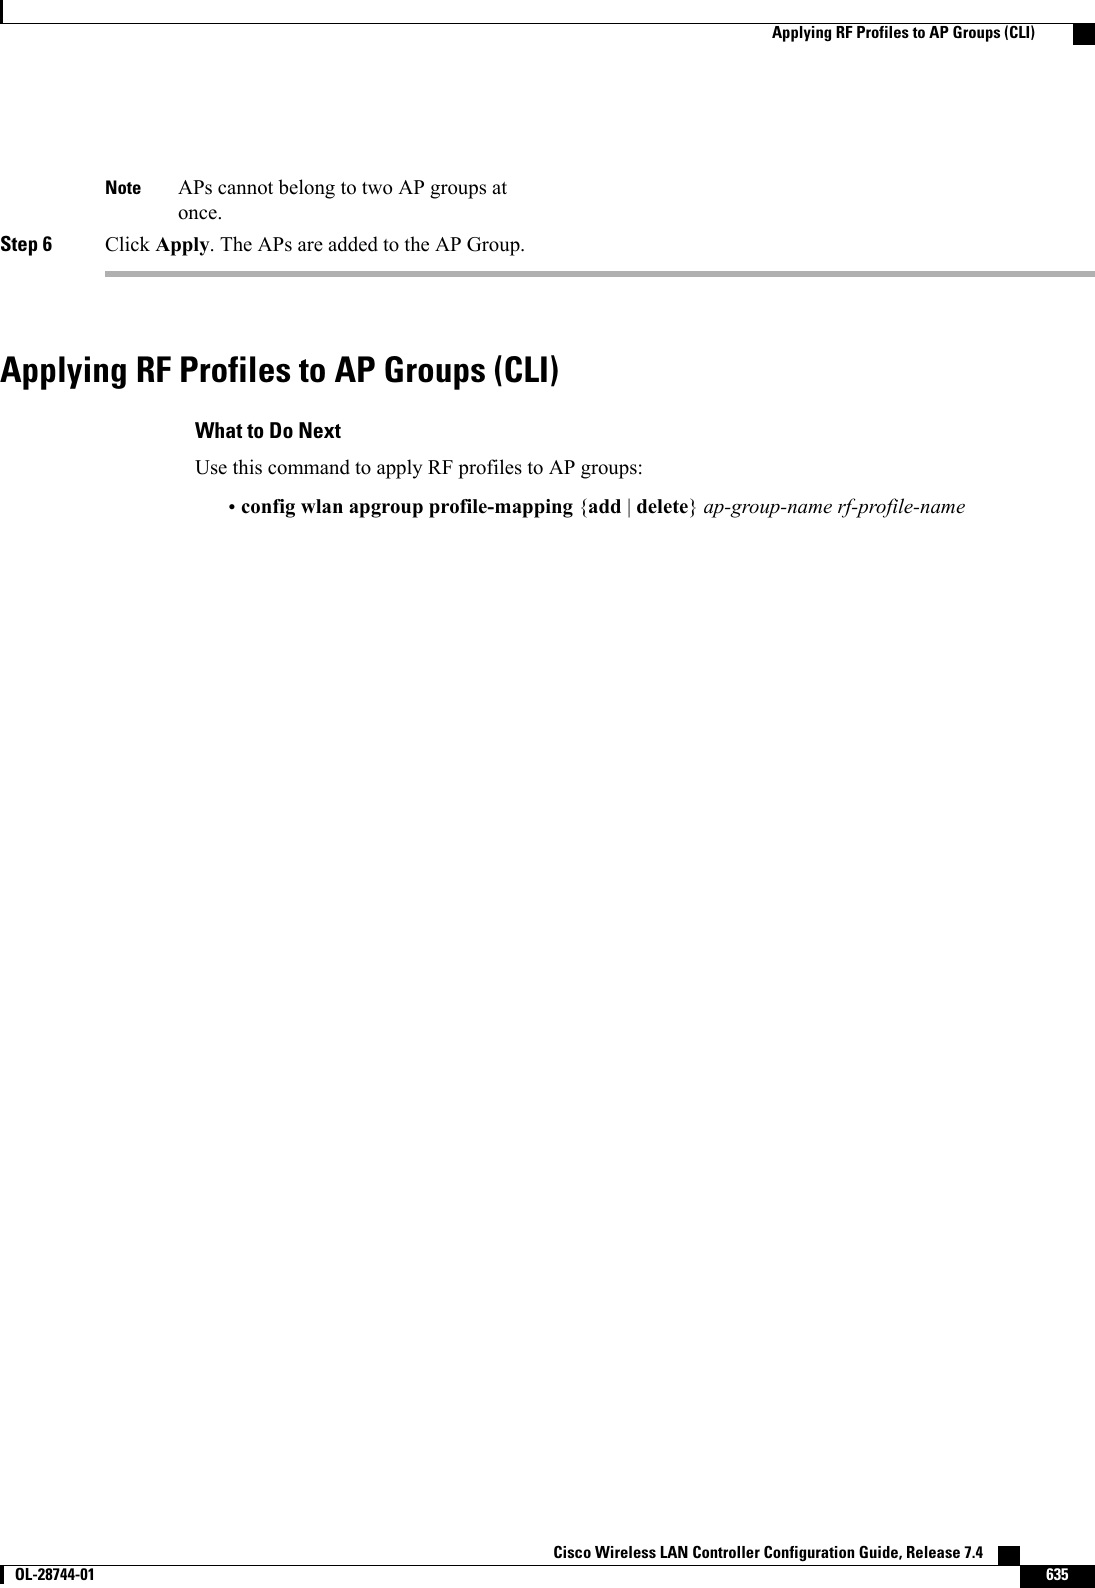 APs cannot belong to two AP groups atonce.NoteStep 6 Click Apply. The APs are added to the AP Group.Applying RF Profiles to AP Groups (CLI)What to Do NextUse this command to apply RF profiles to AP groups:•config wlan apgroup profile-mapping {add |delete}ap-group-name rf-profile-nameCisco Wireless LAN Controller Configuration Guide, Release 7.4       OL-28744-01 635Applying RF Profiles to AP Groups (CLI)